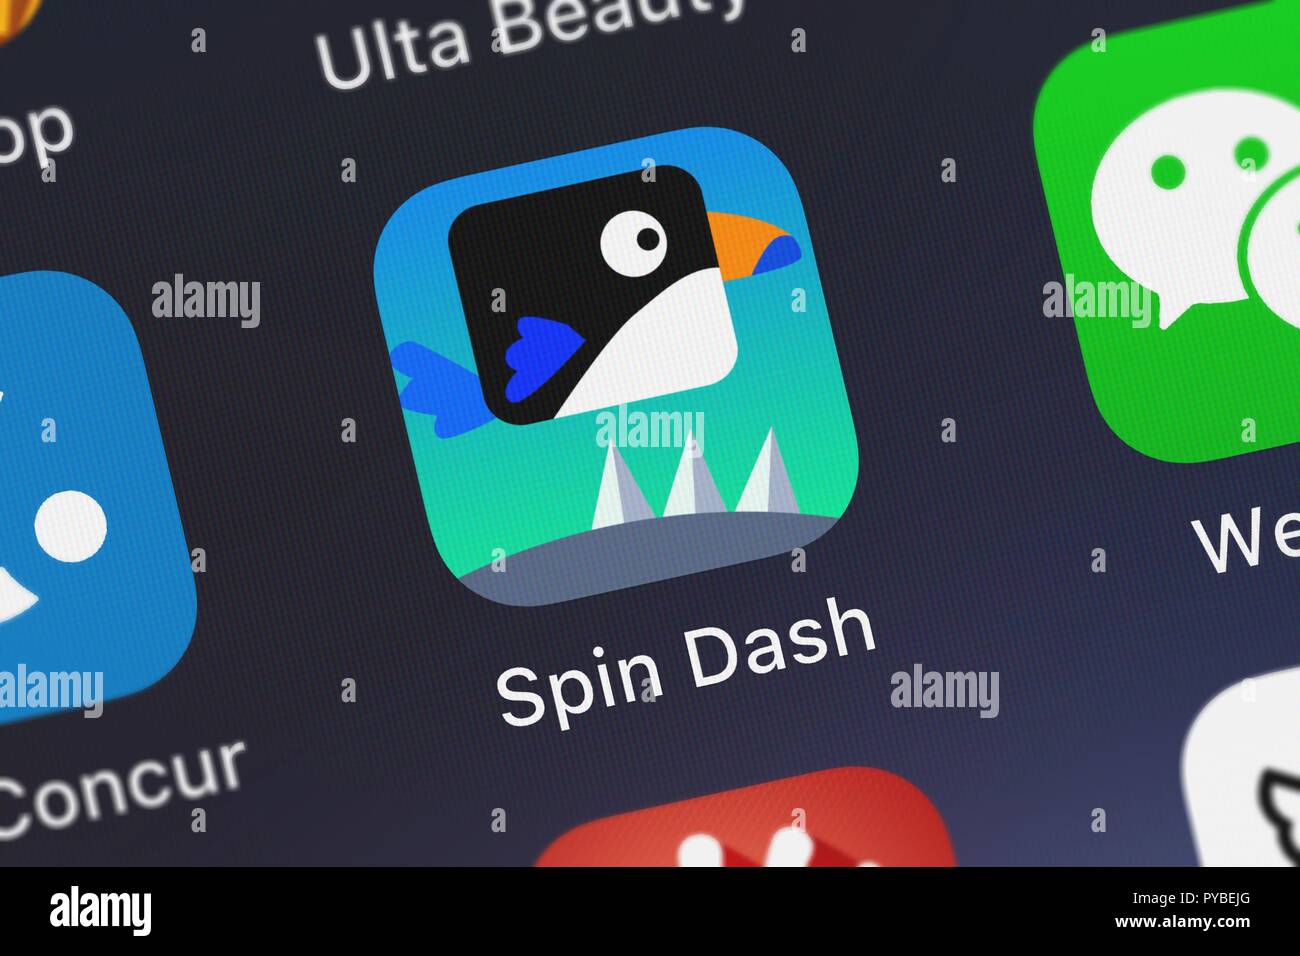 London, United Kingdom - October 26, 2018: Close-up of the Spin Dash - a fun twist for the impossible style games icon from uTappz Mobile Development  Stock Photo